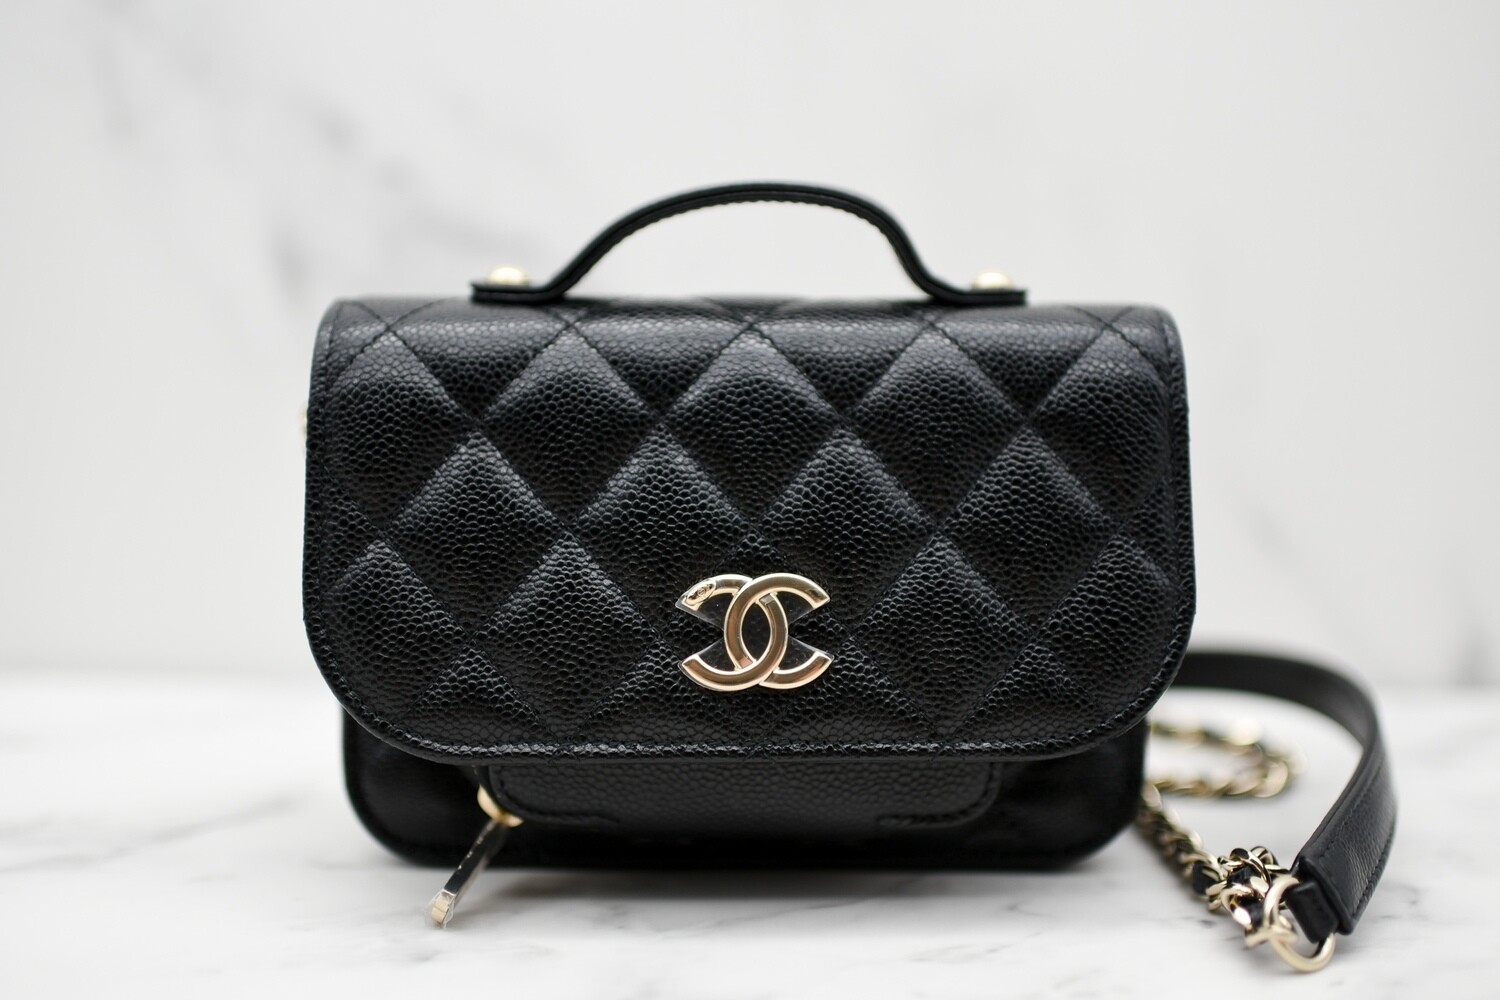 Chanel Business Affinity Clutch with Chain Flap, Black Caviar Leather with  Gold Hardware, New in Box